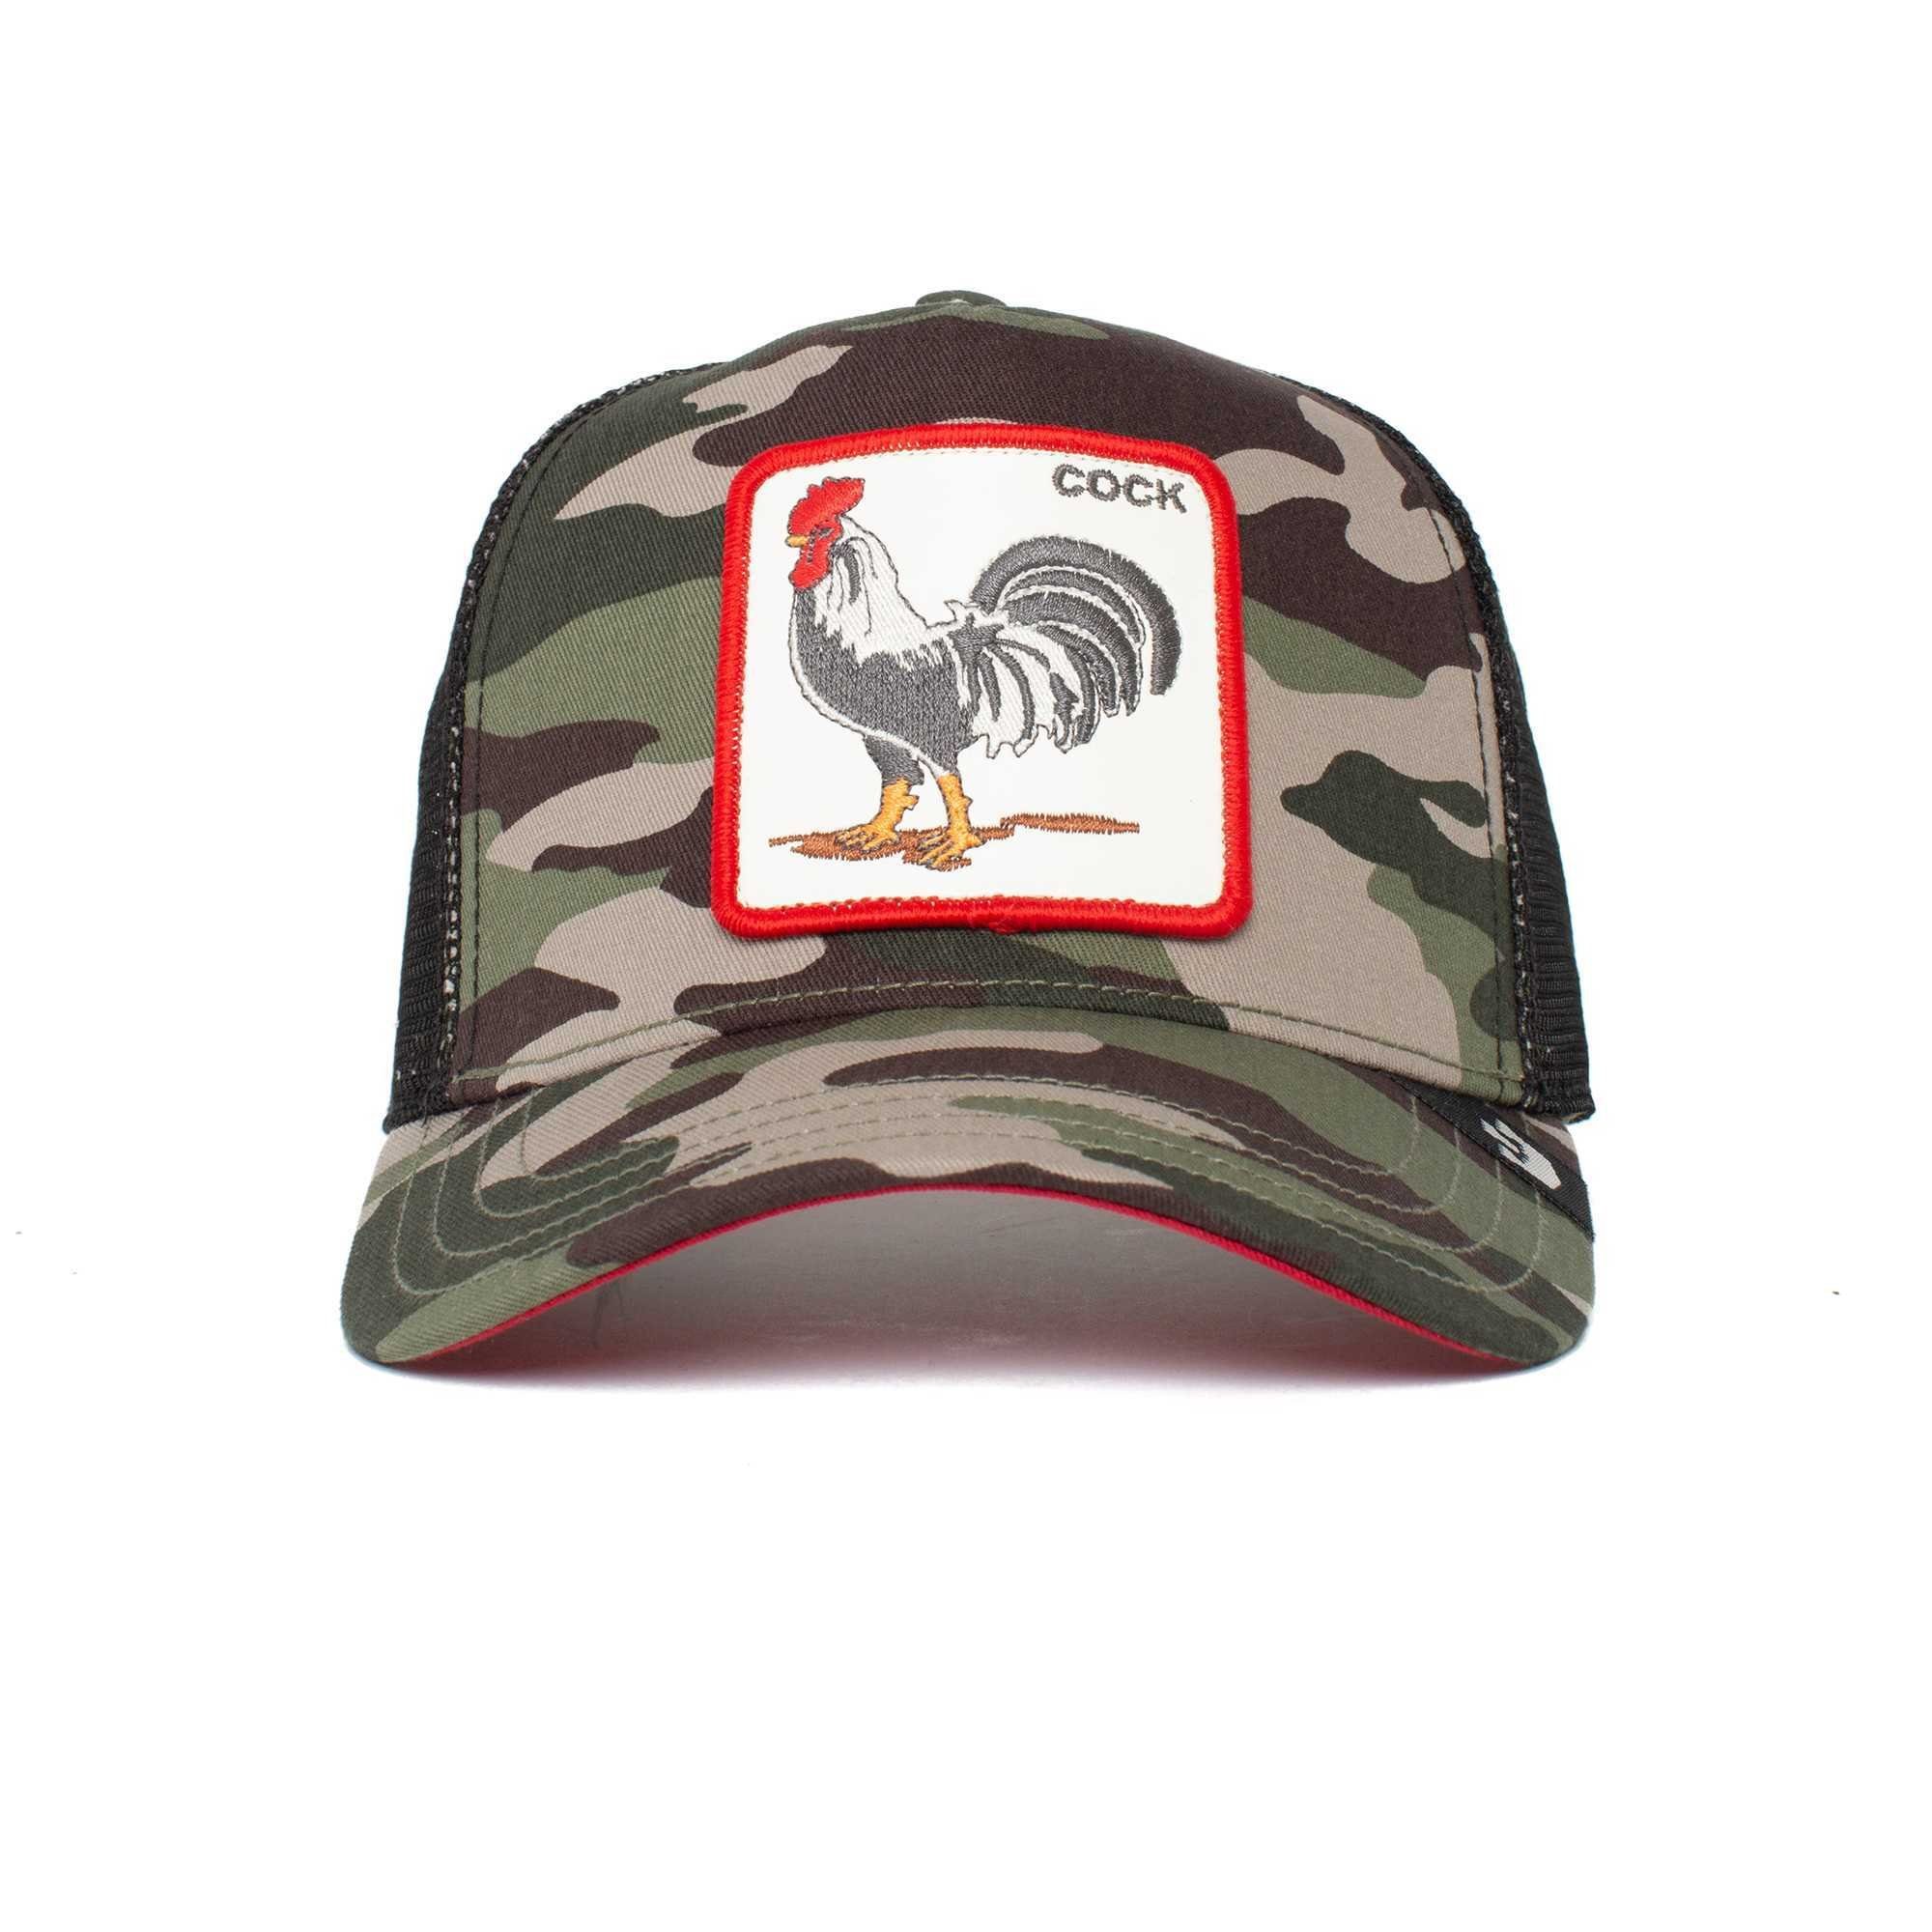 The Cap Unisex Baseball Trucker Kappe, Rooster Size Bros. One GOORIN Frontpatch, - Cap